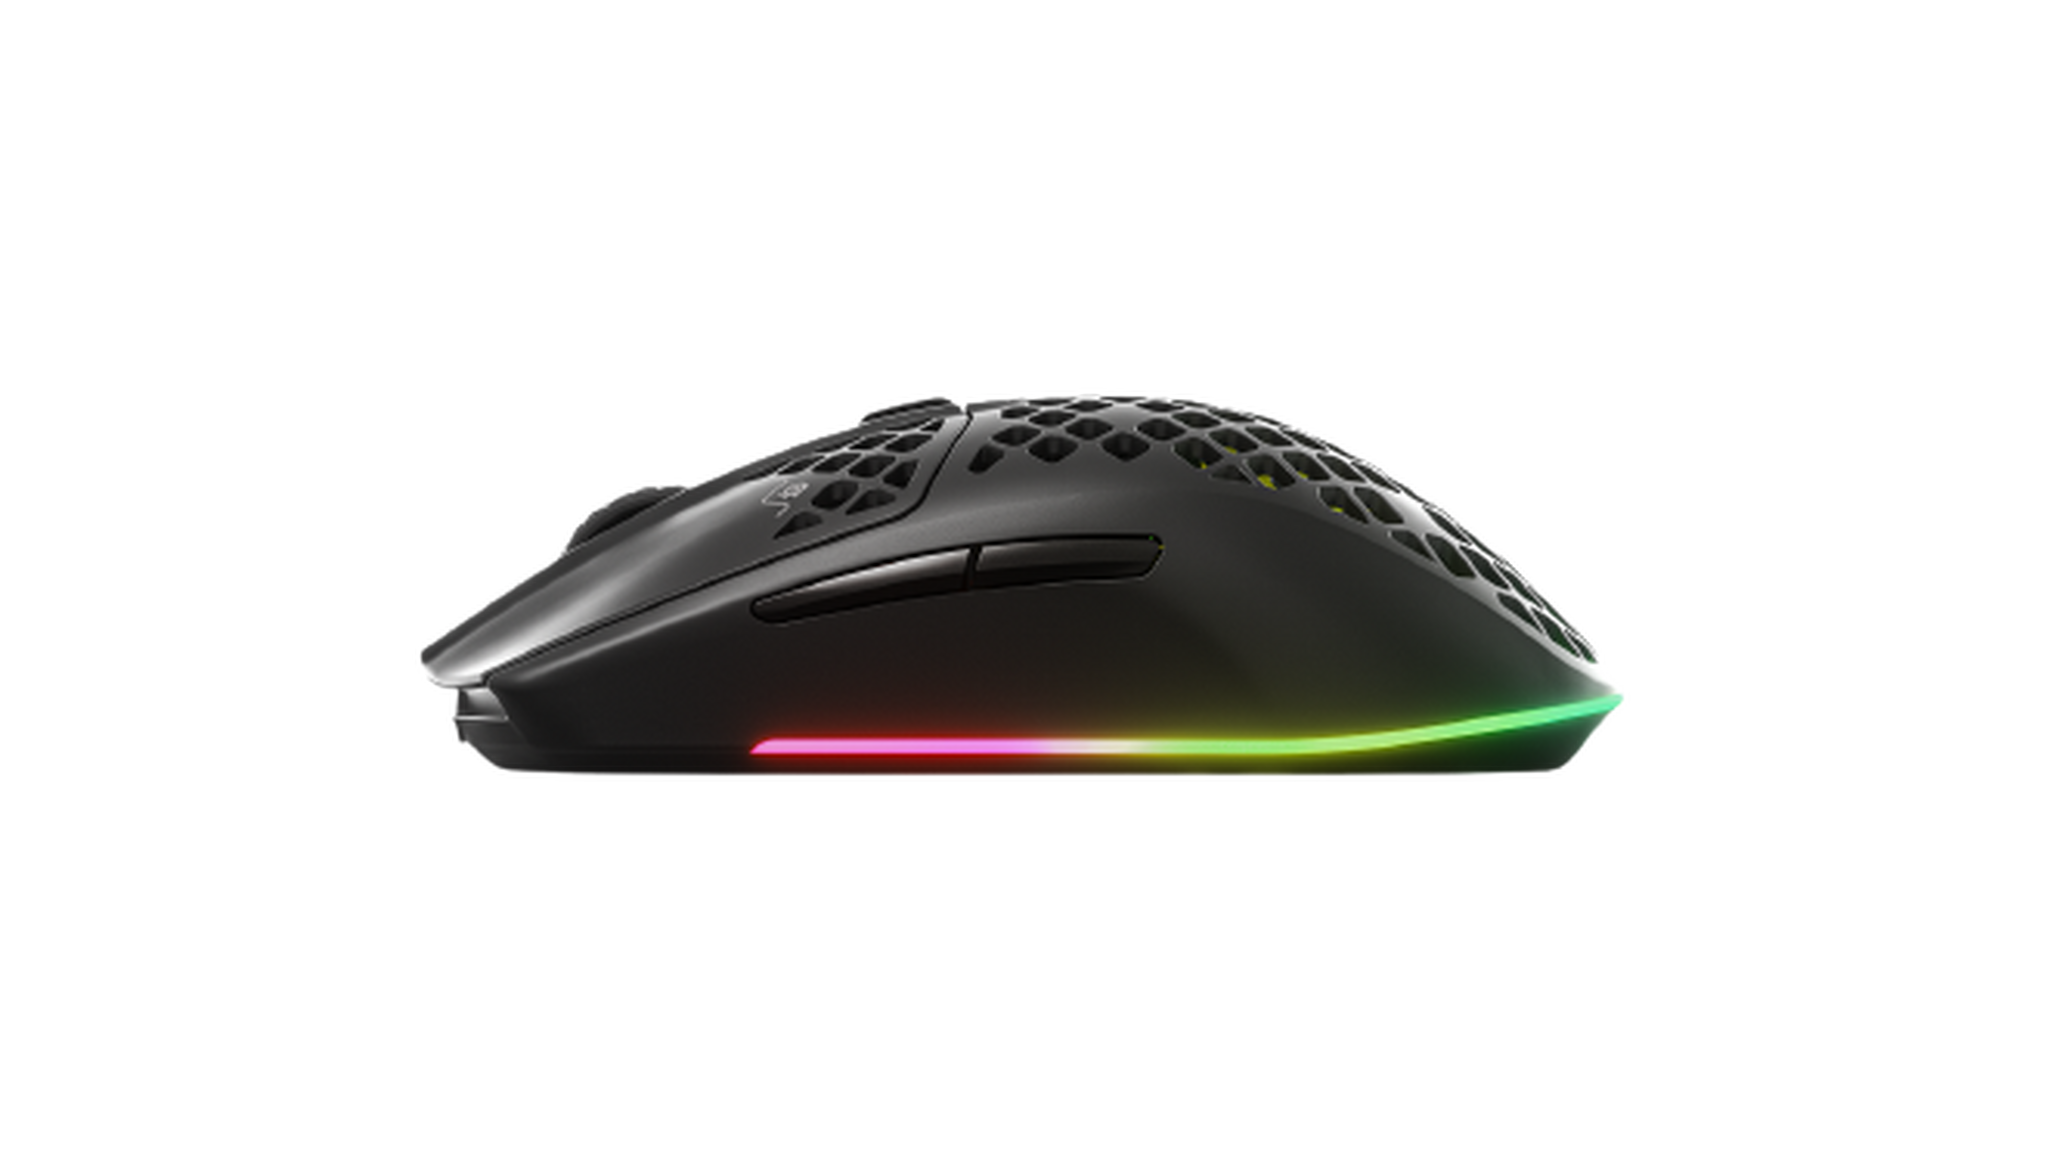 Steelseries Aerox 3 Wireless Gaming Mouse